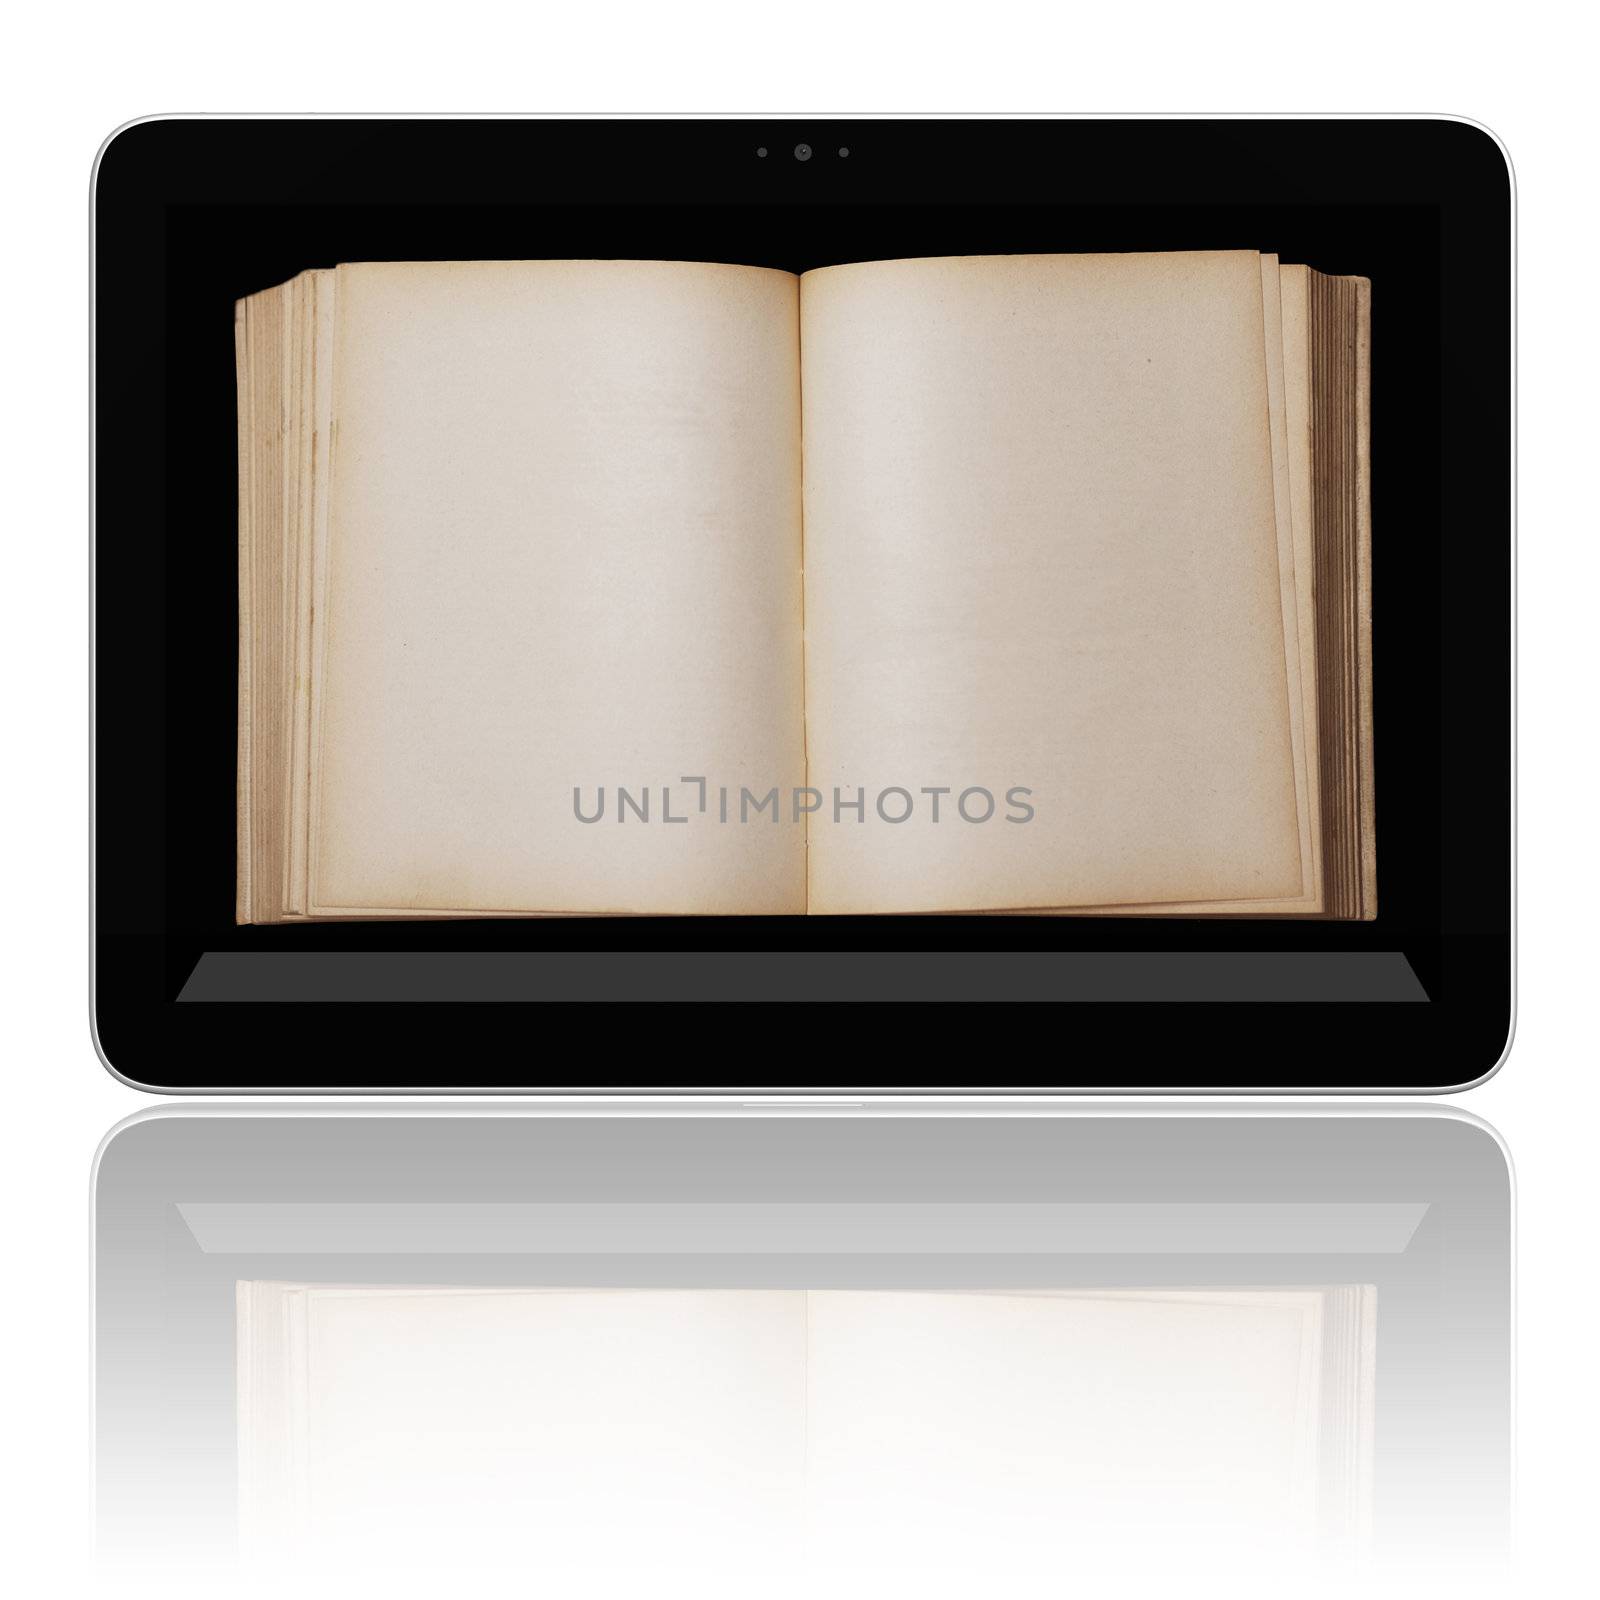 Book and generic teblet computer 3D model isolated on white, E-book E-reader concept